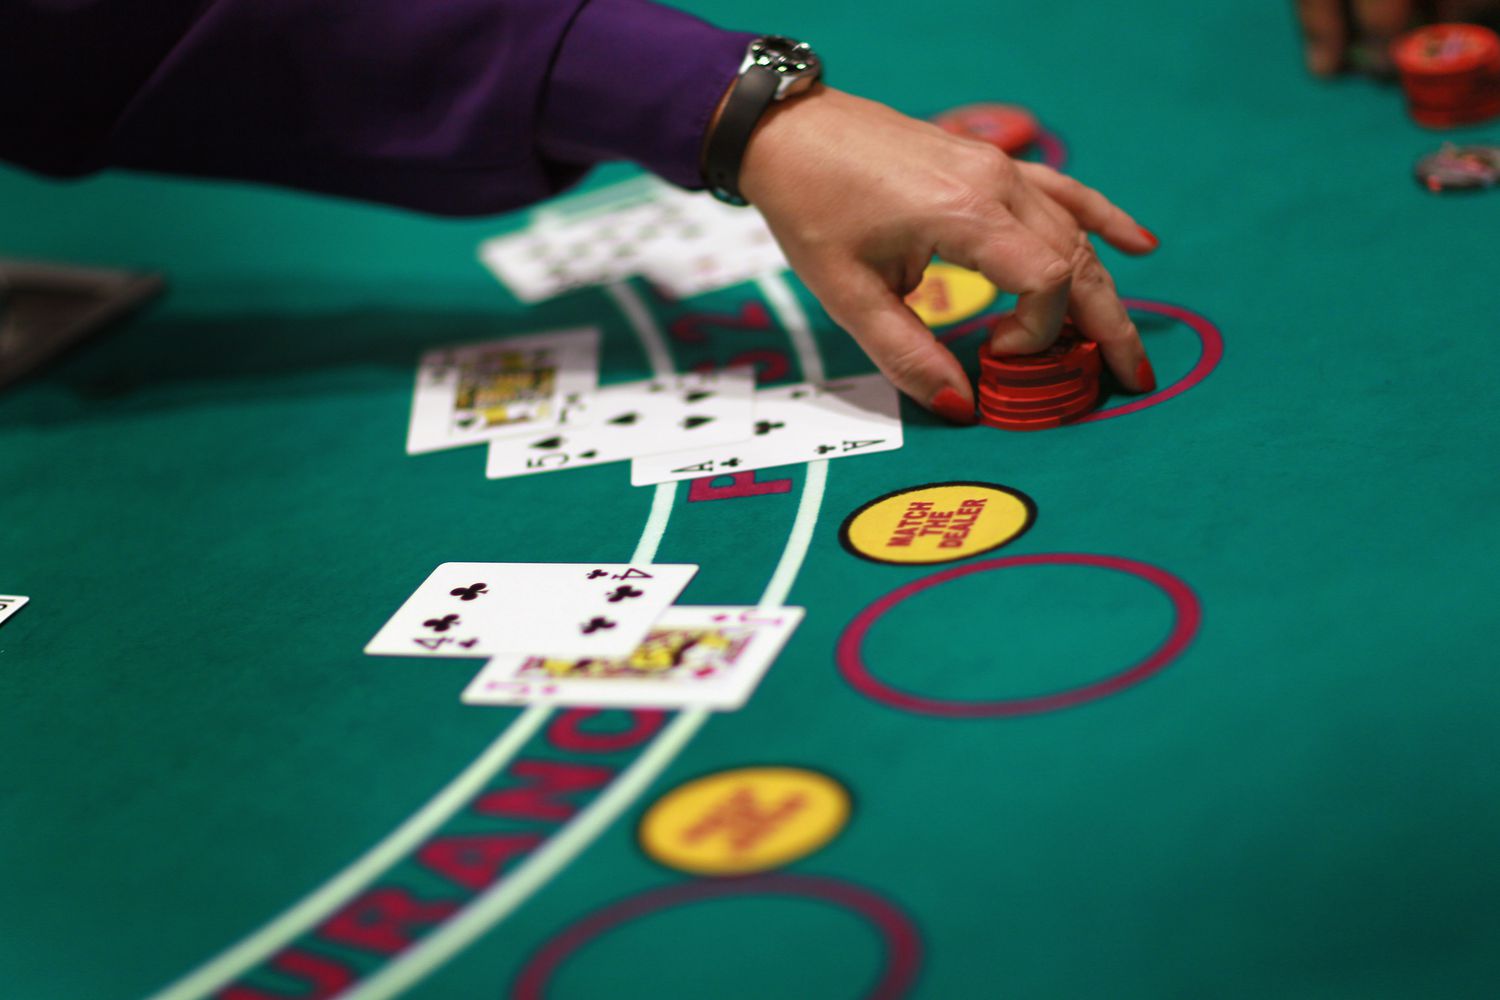 How to Make $100 a Day Playing Blackjack